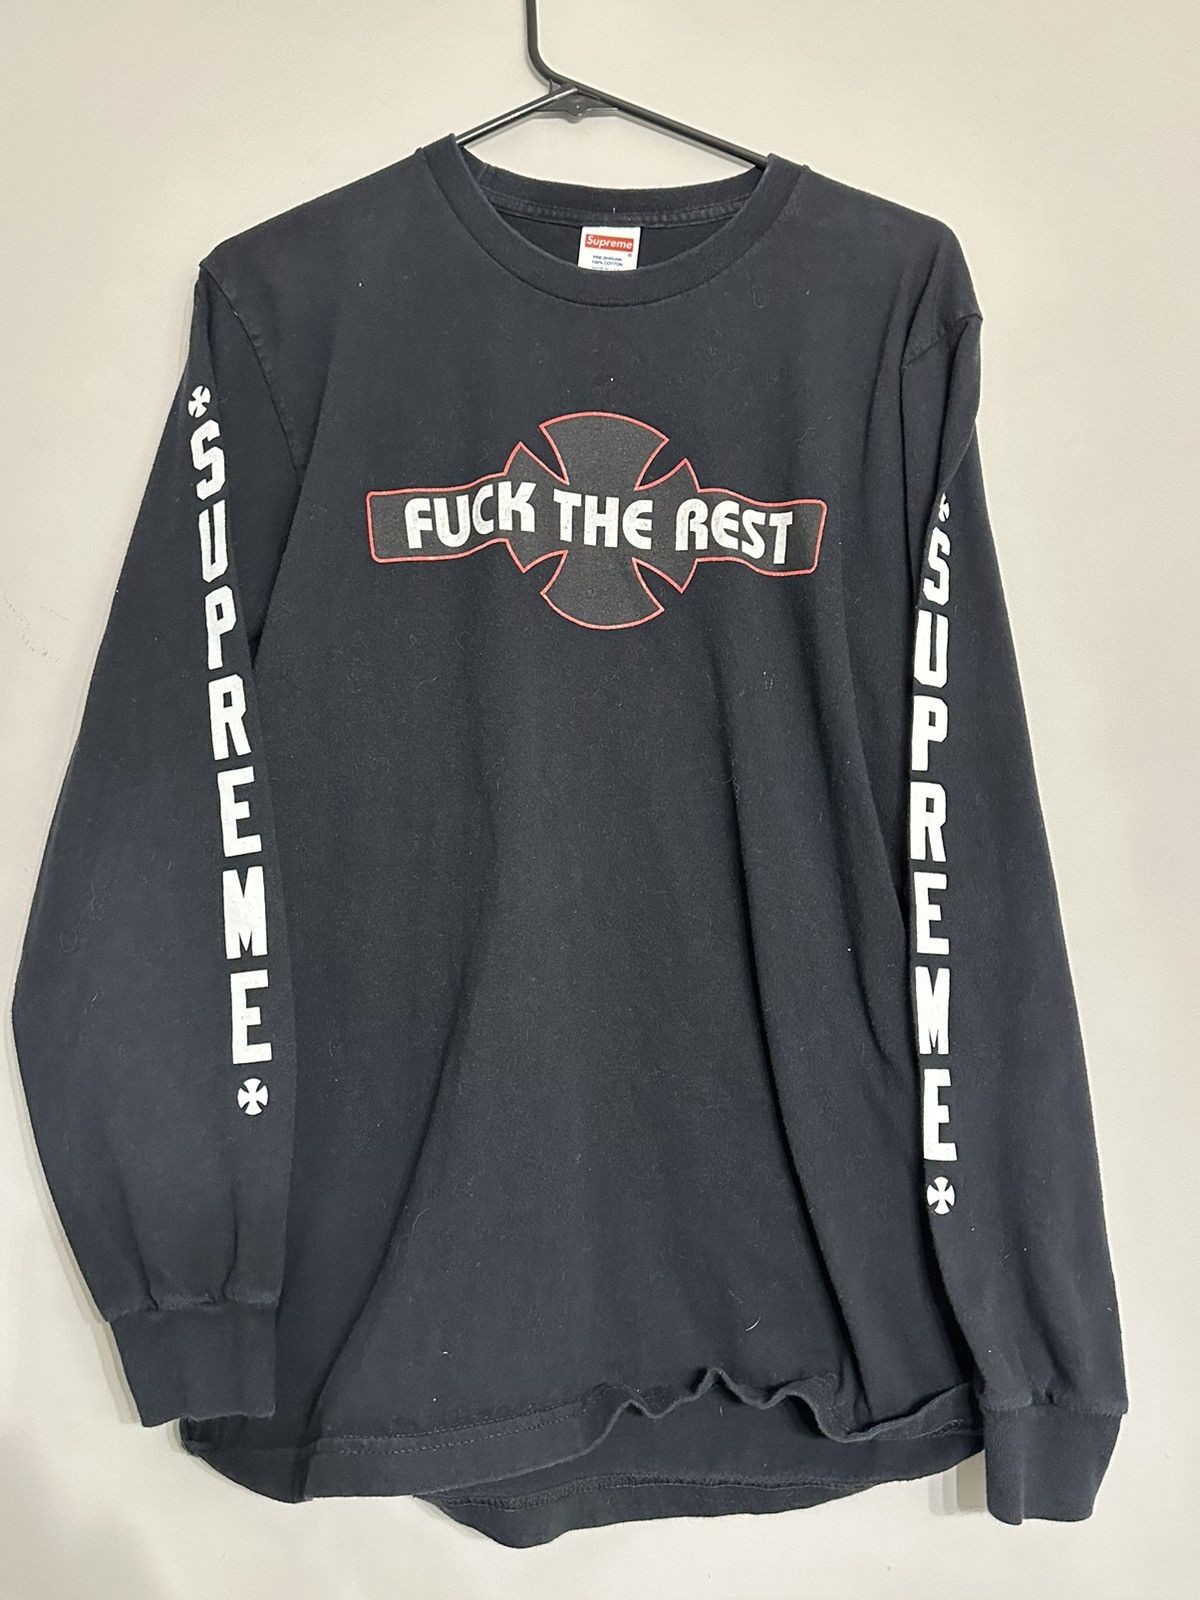 Supreme Supreme x Independent Truck Co 'Fuck The Rest' Long Sleeve | Grailed